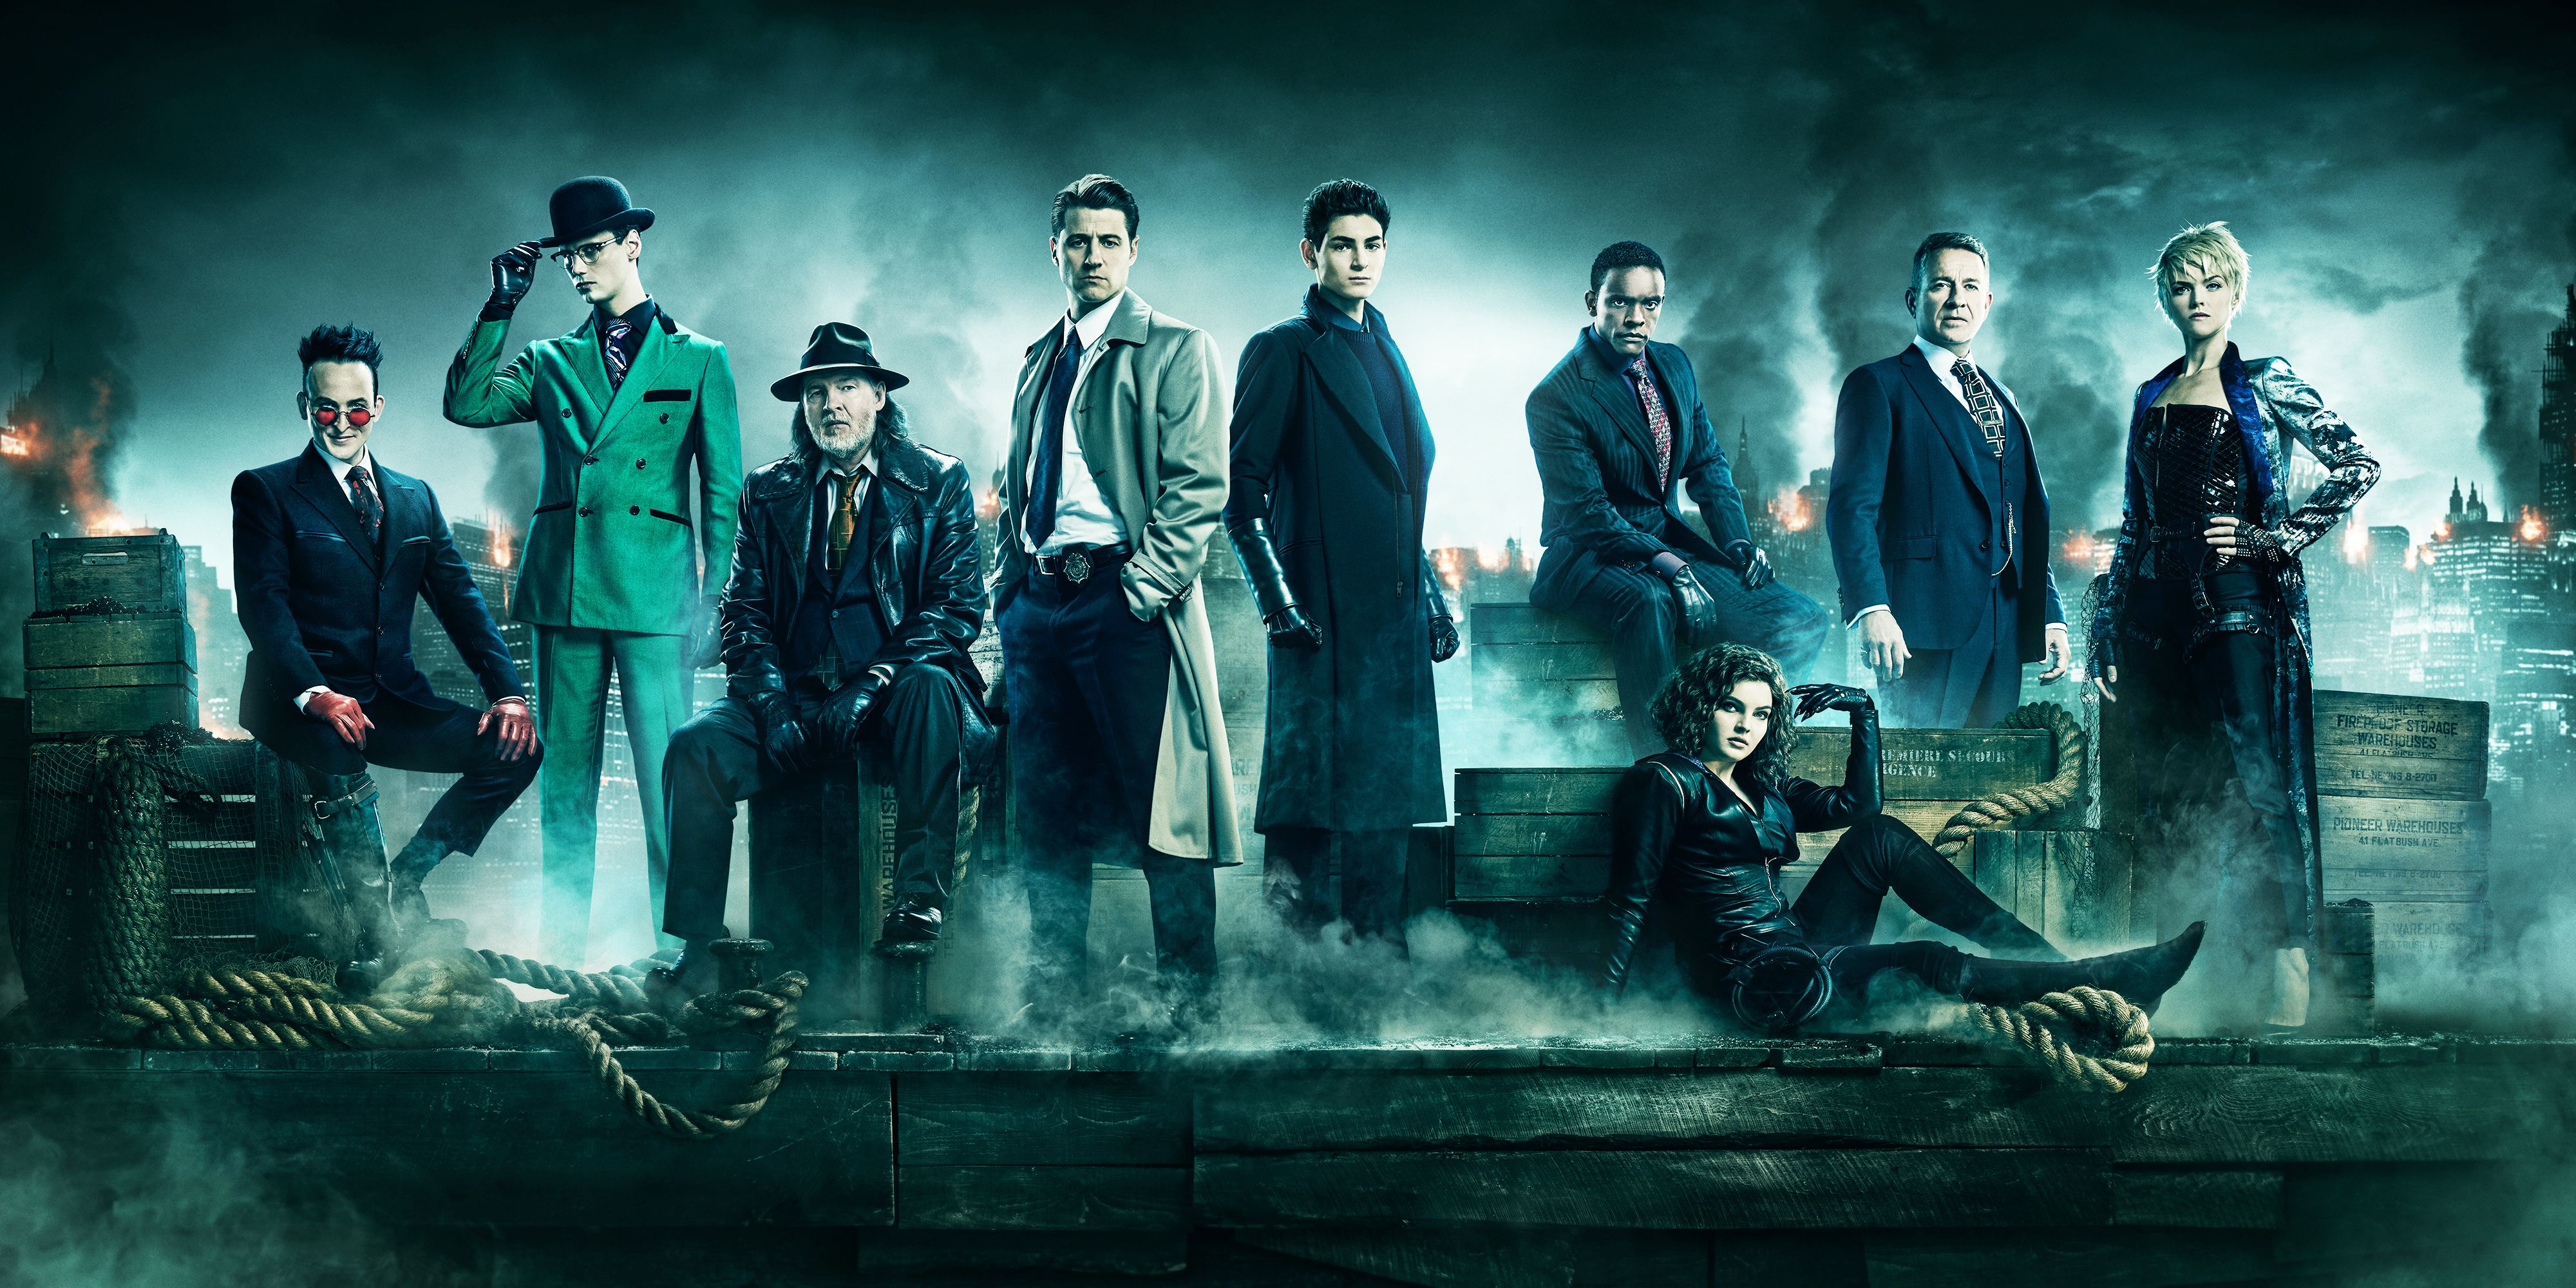 The cast of Gotham posing for a promotional image